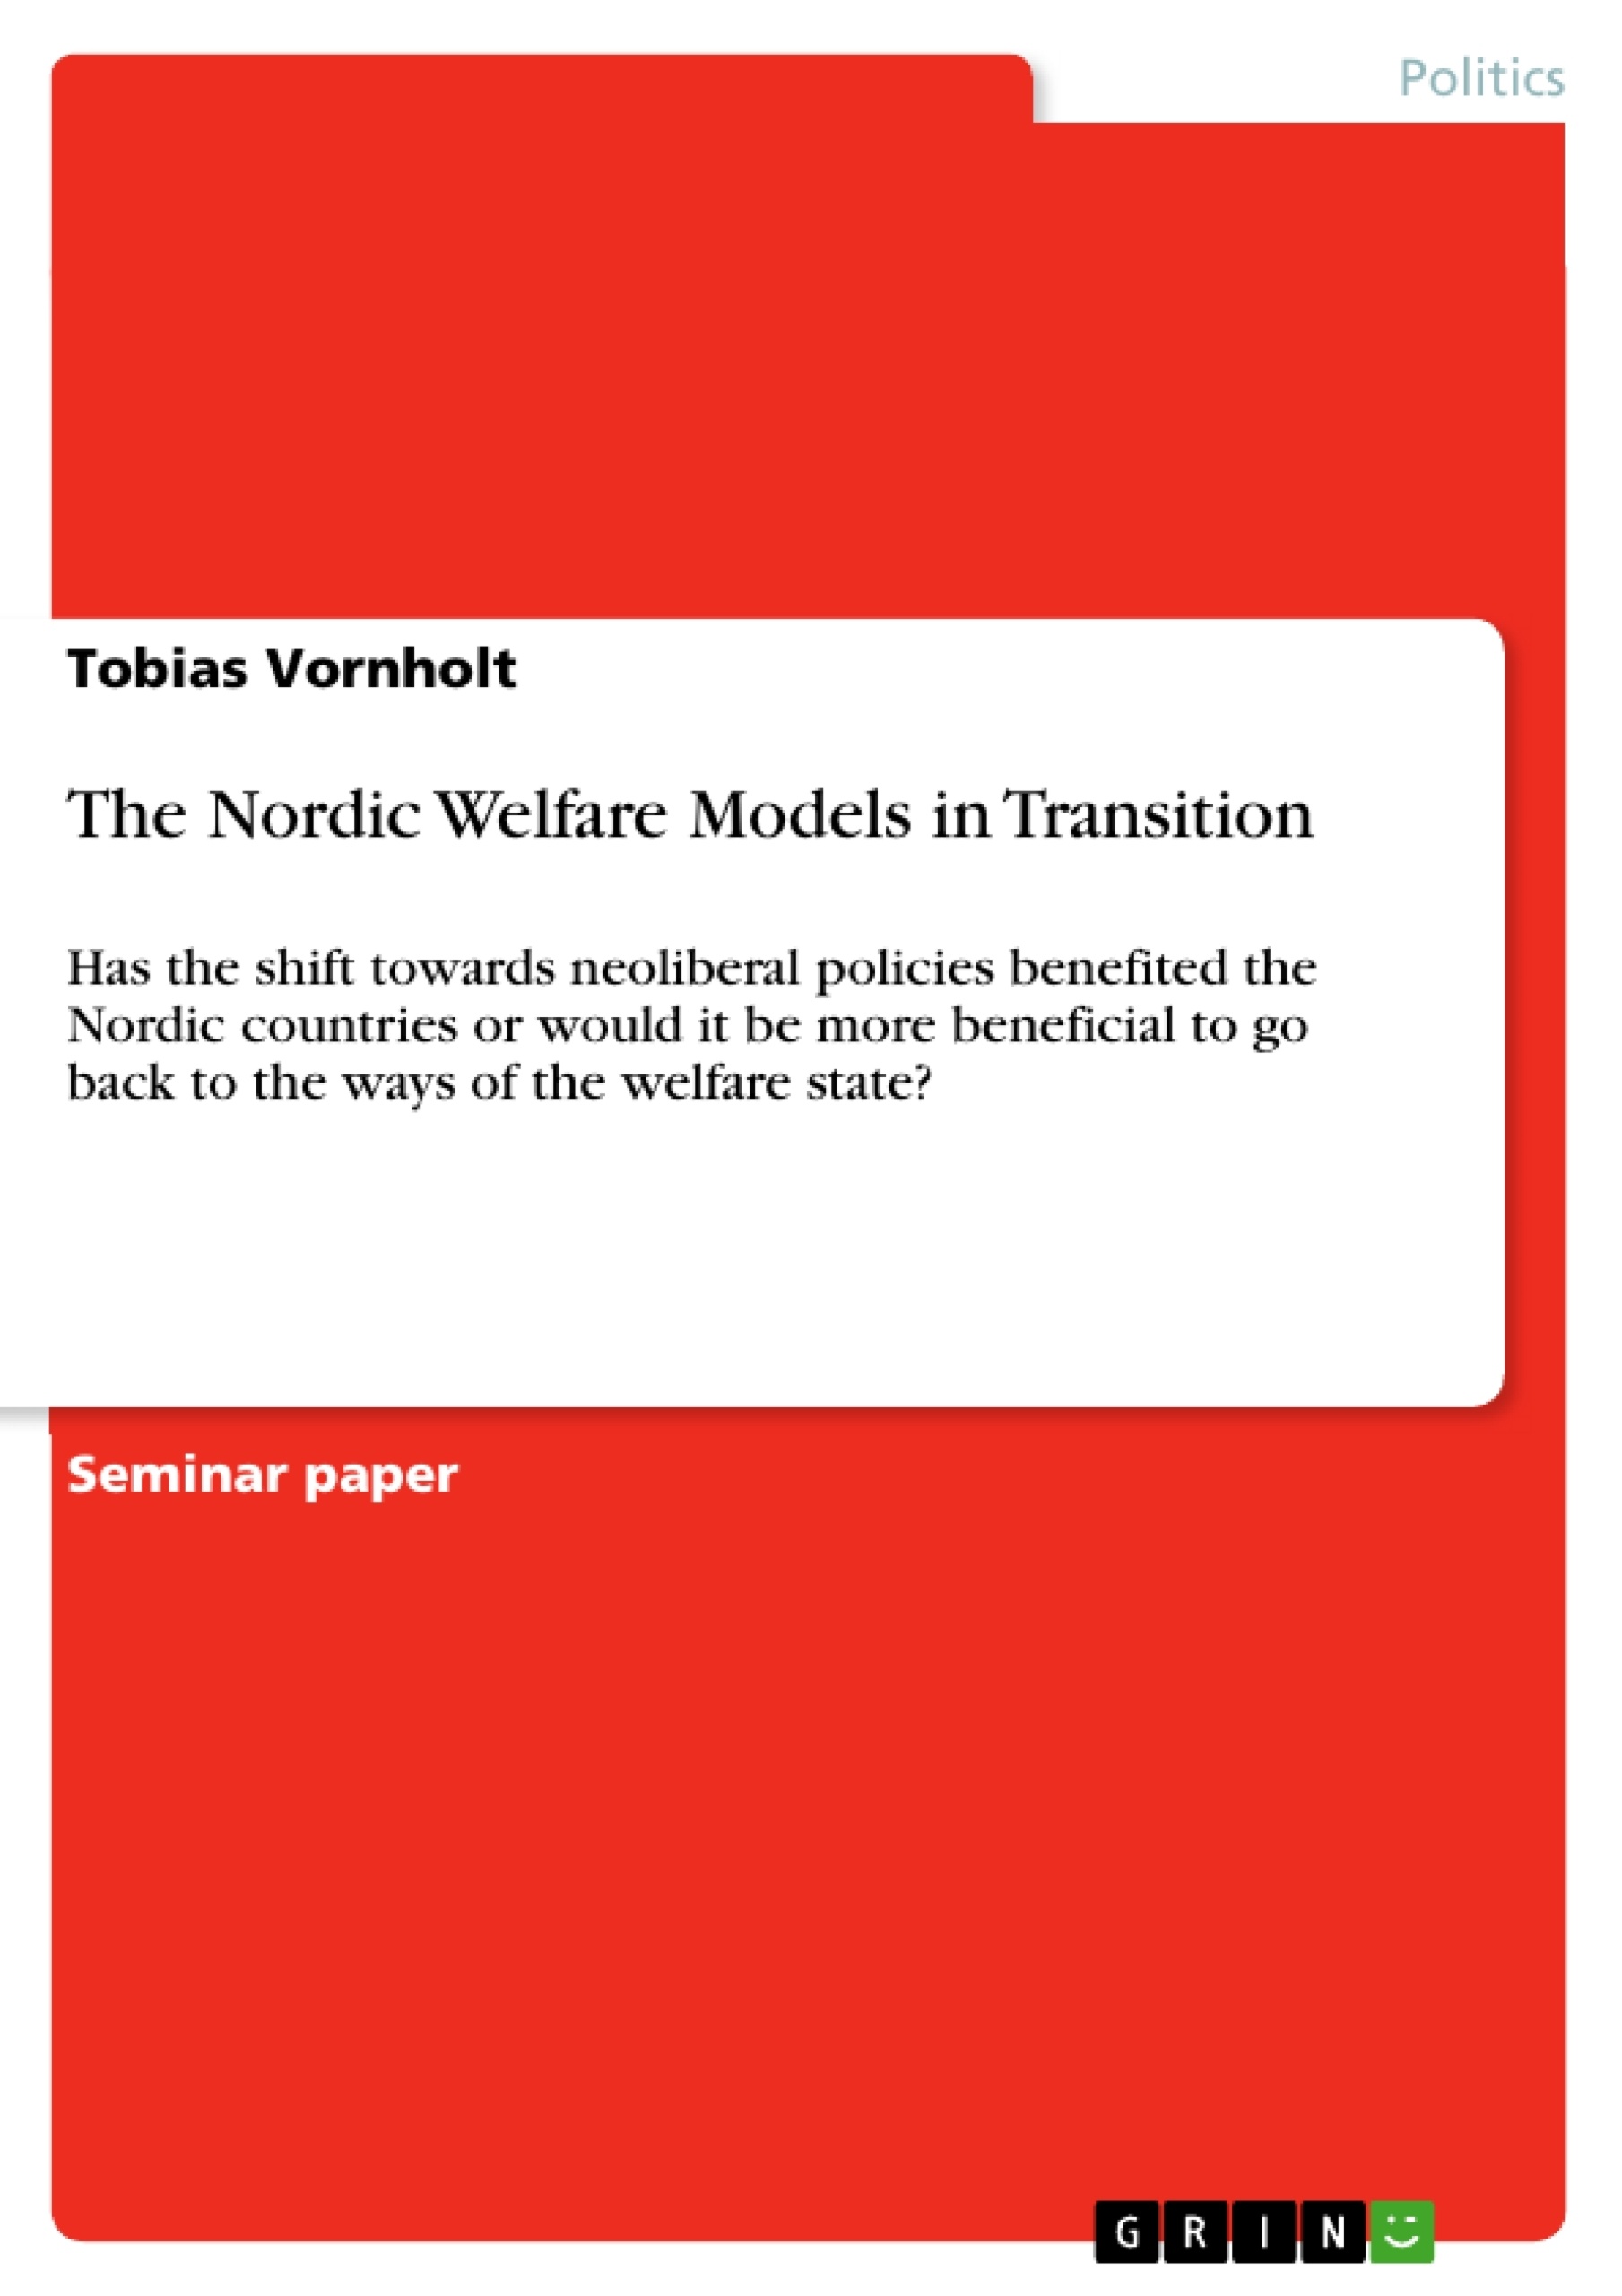 Titre: The Nordic Welfare Models in Transition